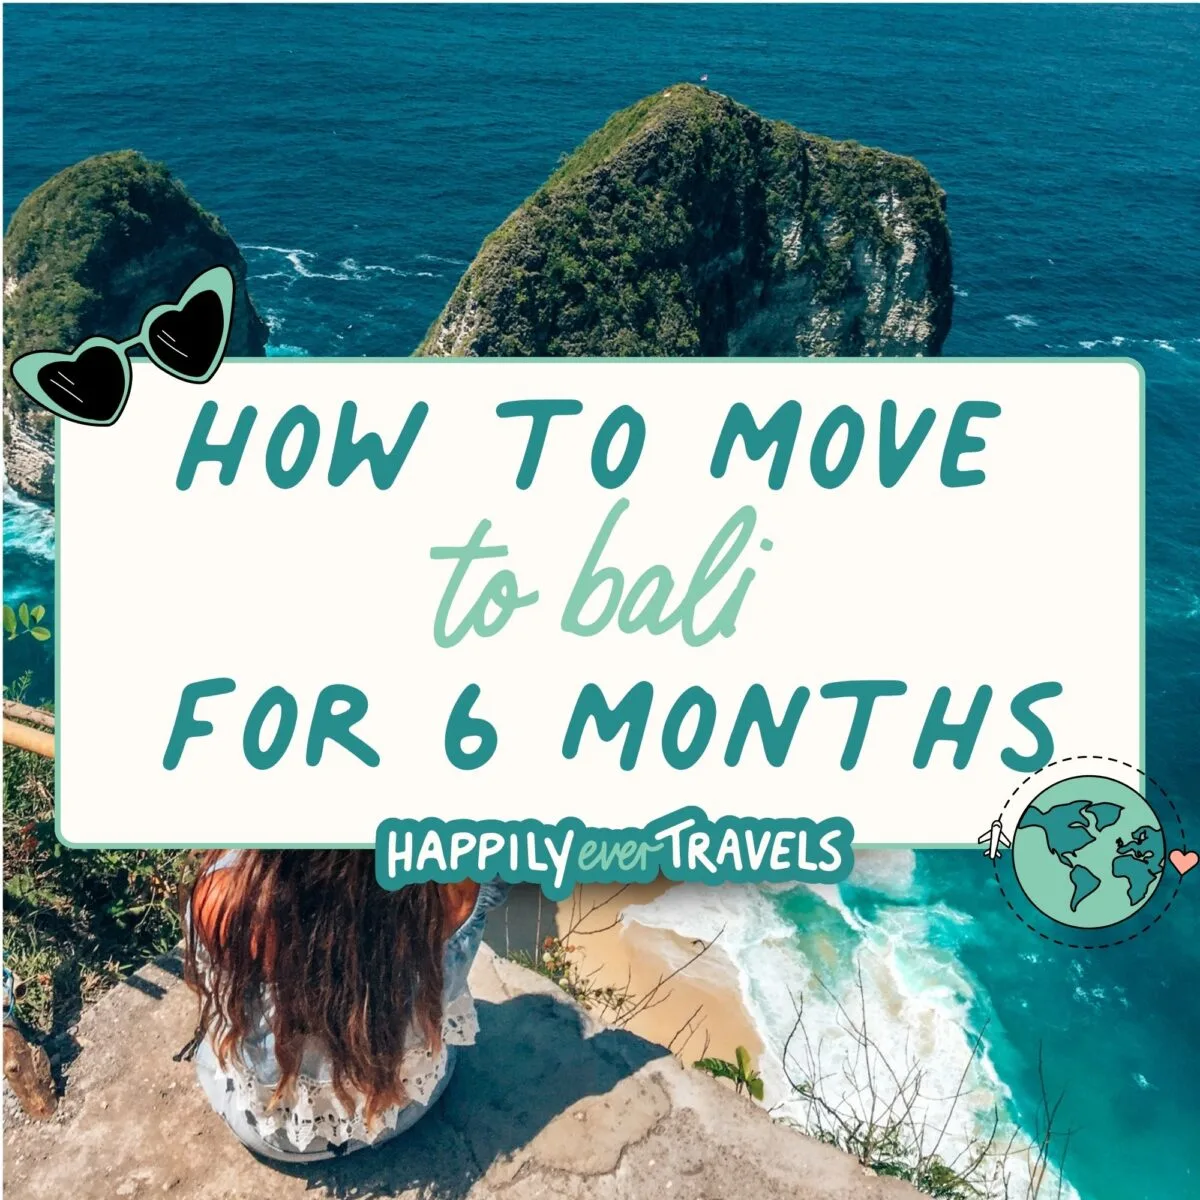 How to Move to Bali for 6 Months in 6 Steps